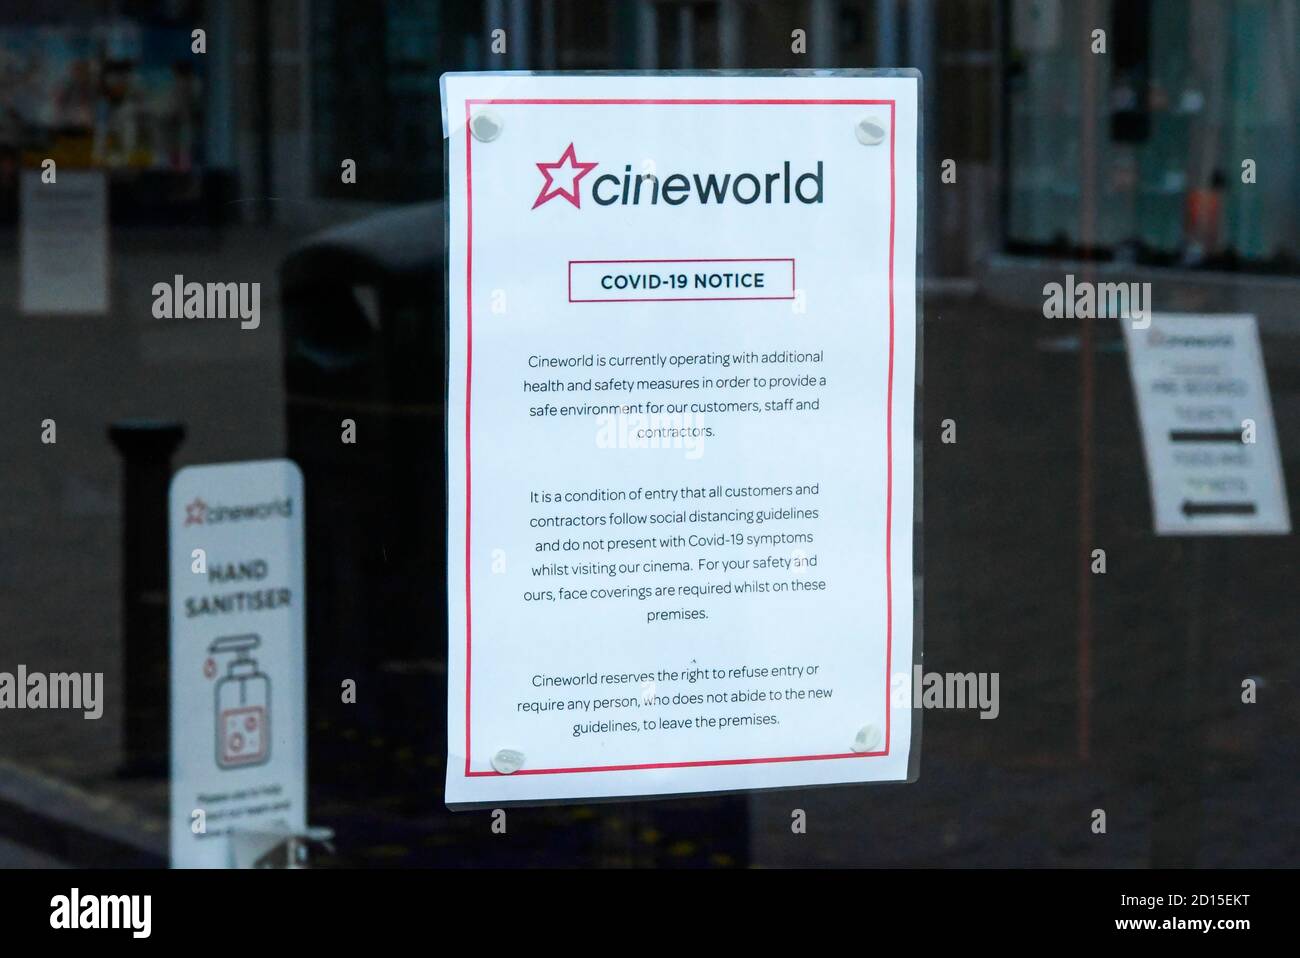 Weymouth, Dorset, UK.  5th September 2020.  Cineworld is to close all its cinemas on Thursday due to the ongoing Covid-19 pandemic effecting the film industry.  Weymouth branch of Cineworld in Dorset is one of the 127 Cineworld and Picturehouse venues in the UK set to shutdown this week.  A notice on the front door informing customers of the Covid-19 health and safety measures at the cinema.  Picture Credit: Graham Hunt/Alamy Live News Stock Photo